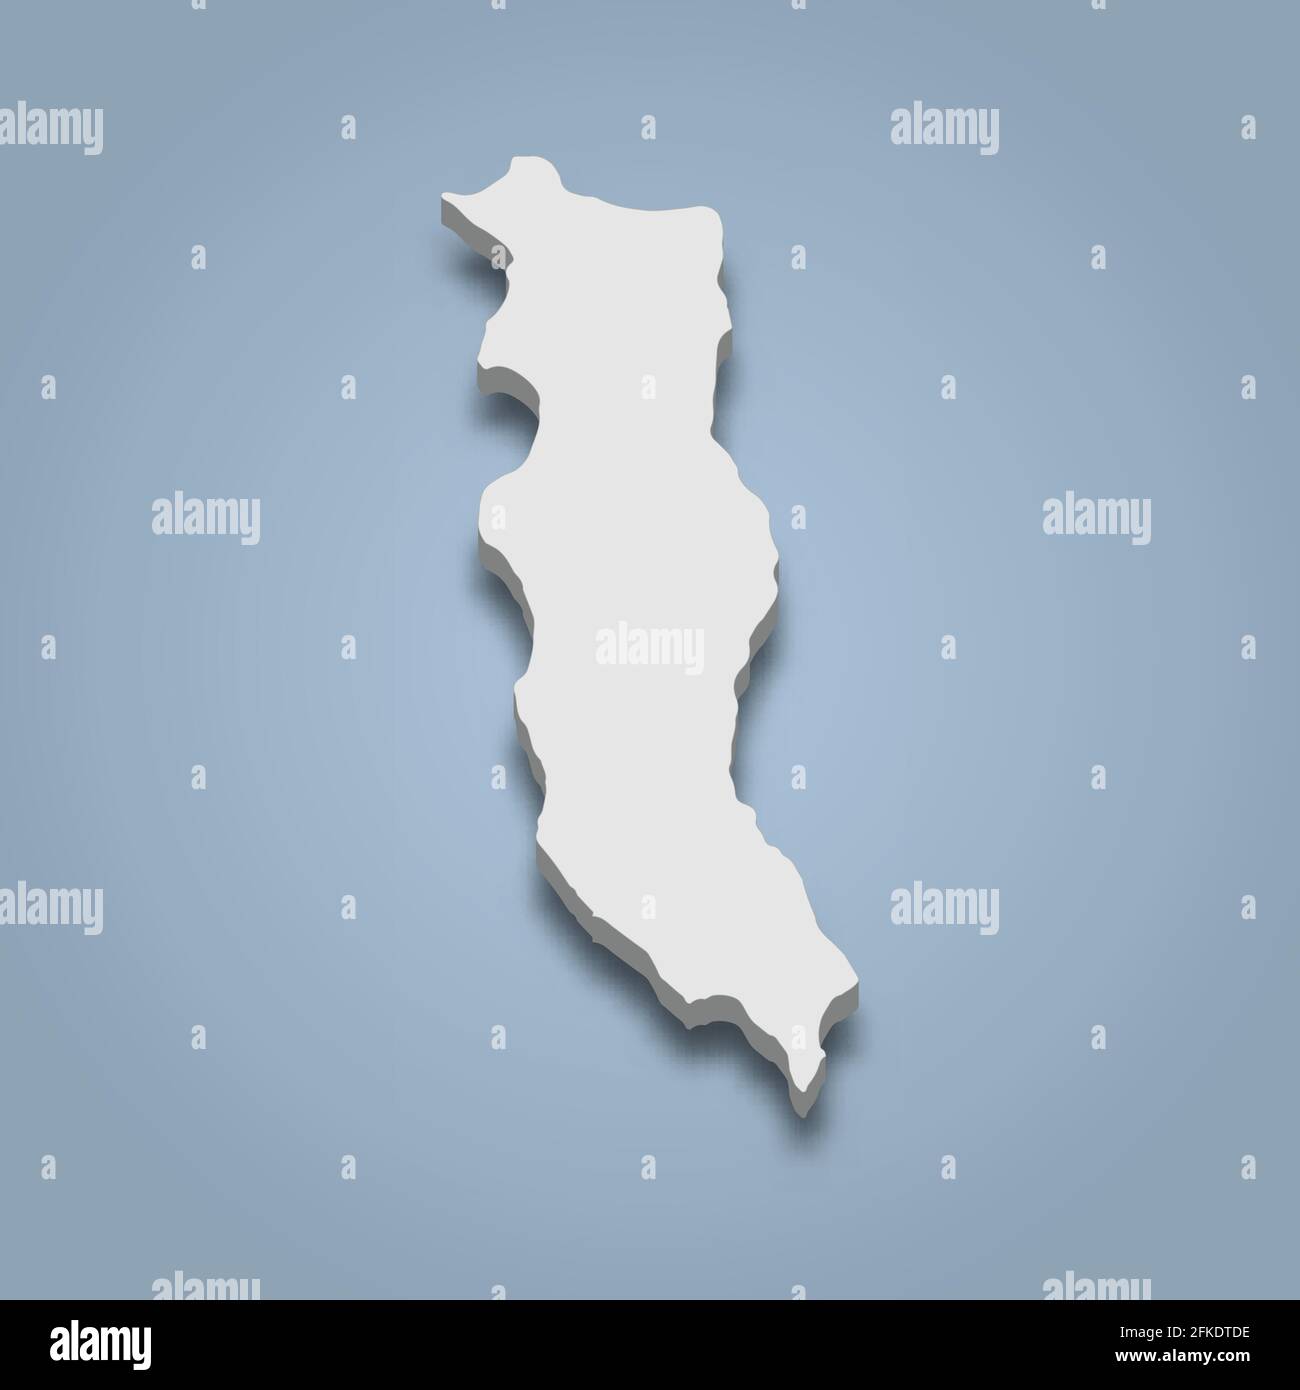 3d isometric map of Dent is an island in Whitsunday Islands, isolaated vector illustration Stock Vector